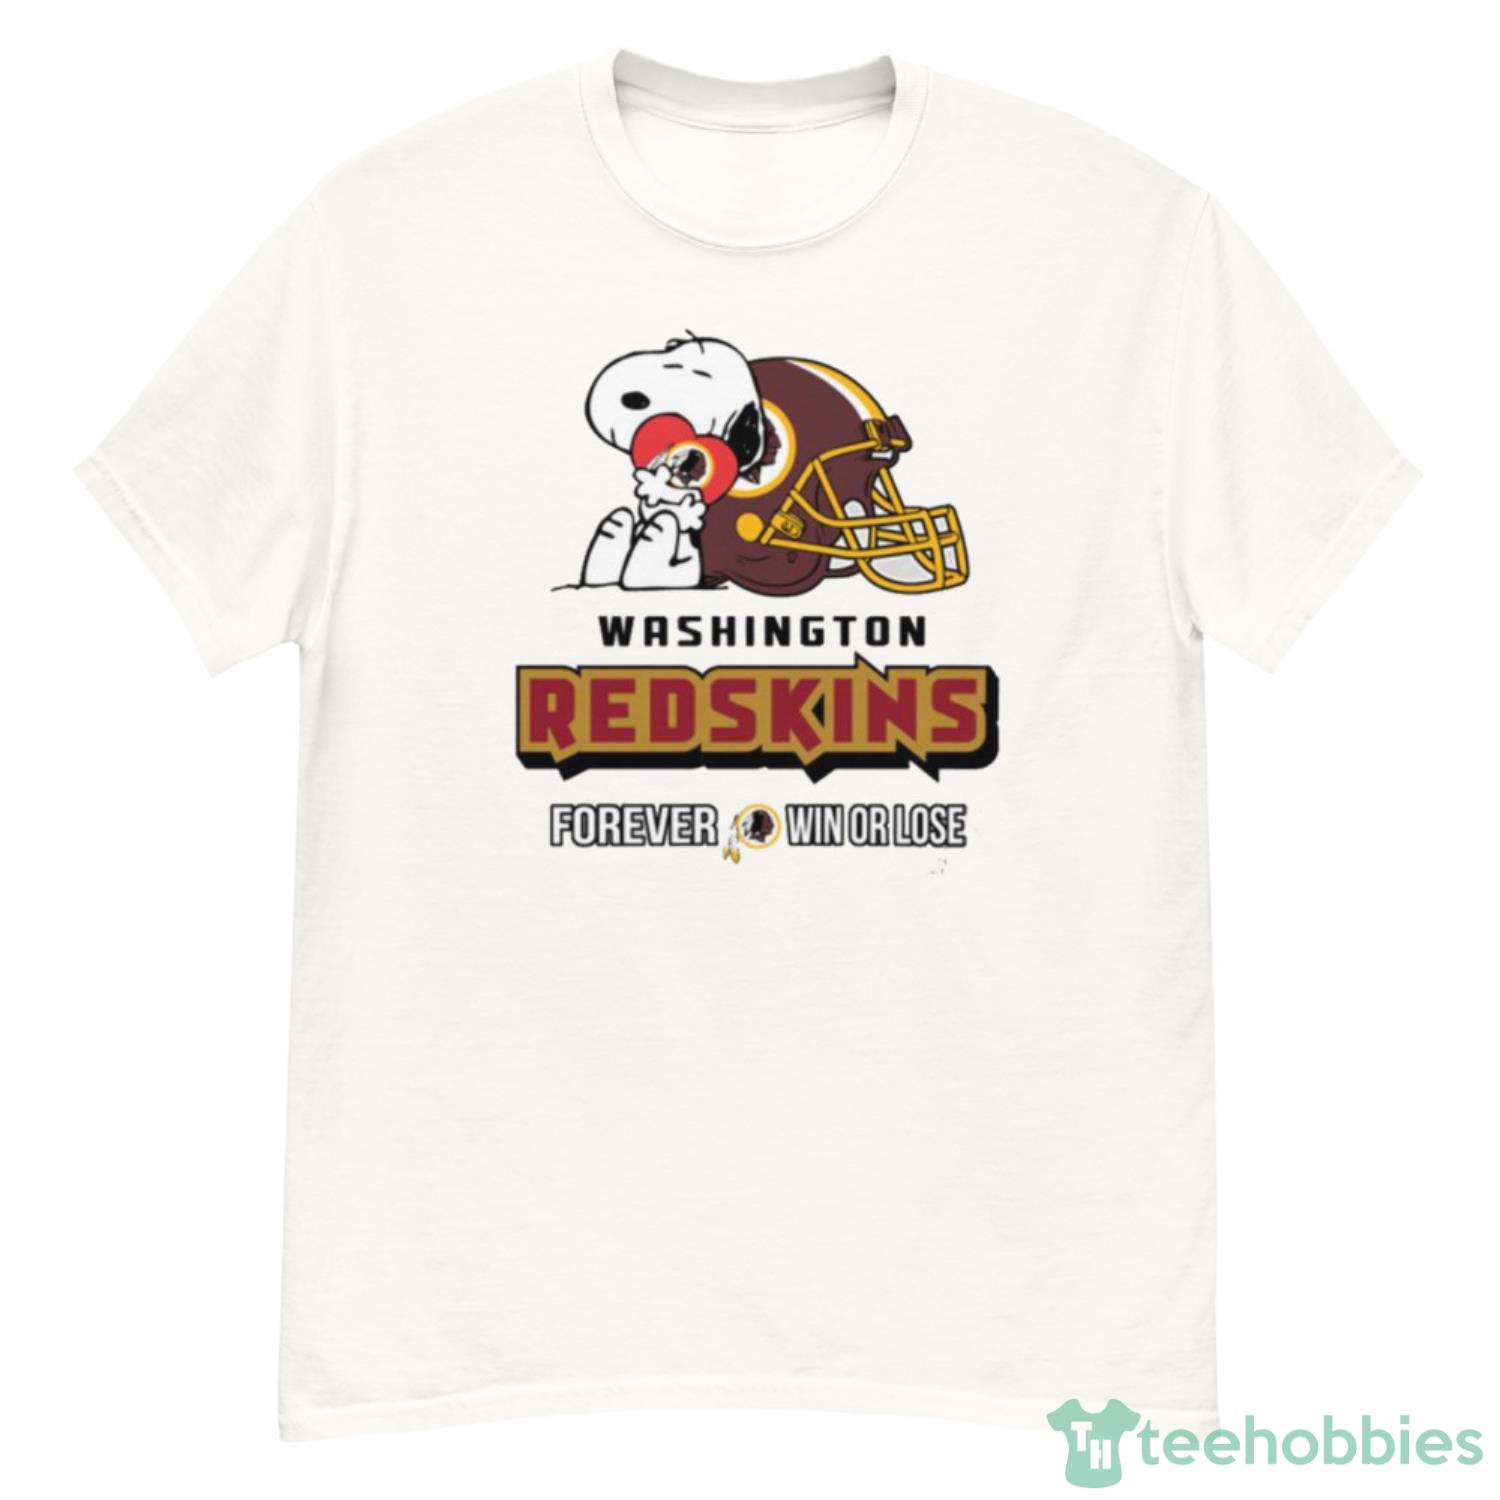 NFL The Peanuts Movie Snoopy Forever Win Or Lose Football Washington Redskins T Shirt - G500 Men’s Classic T-Shirt